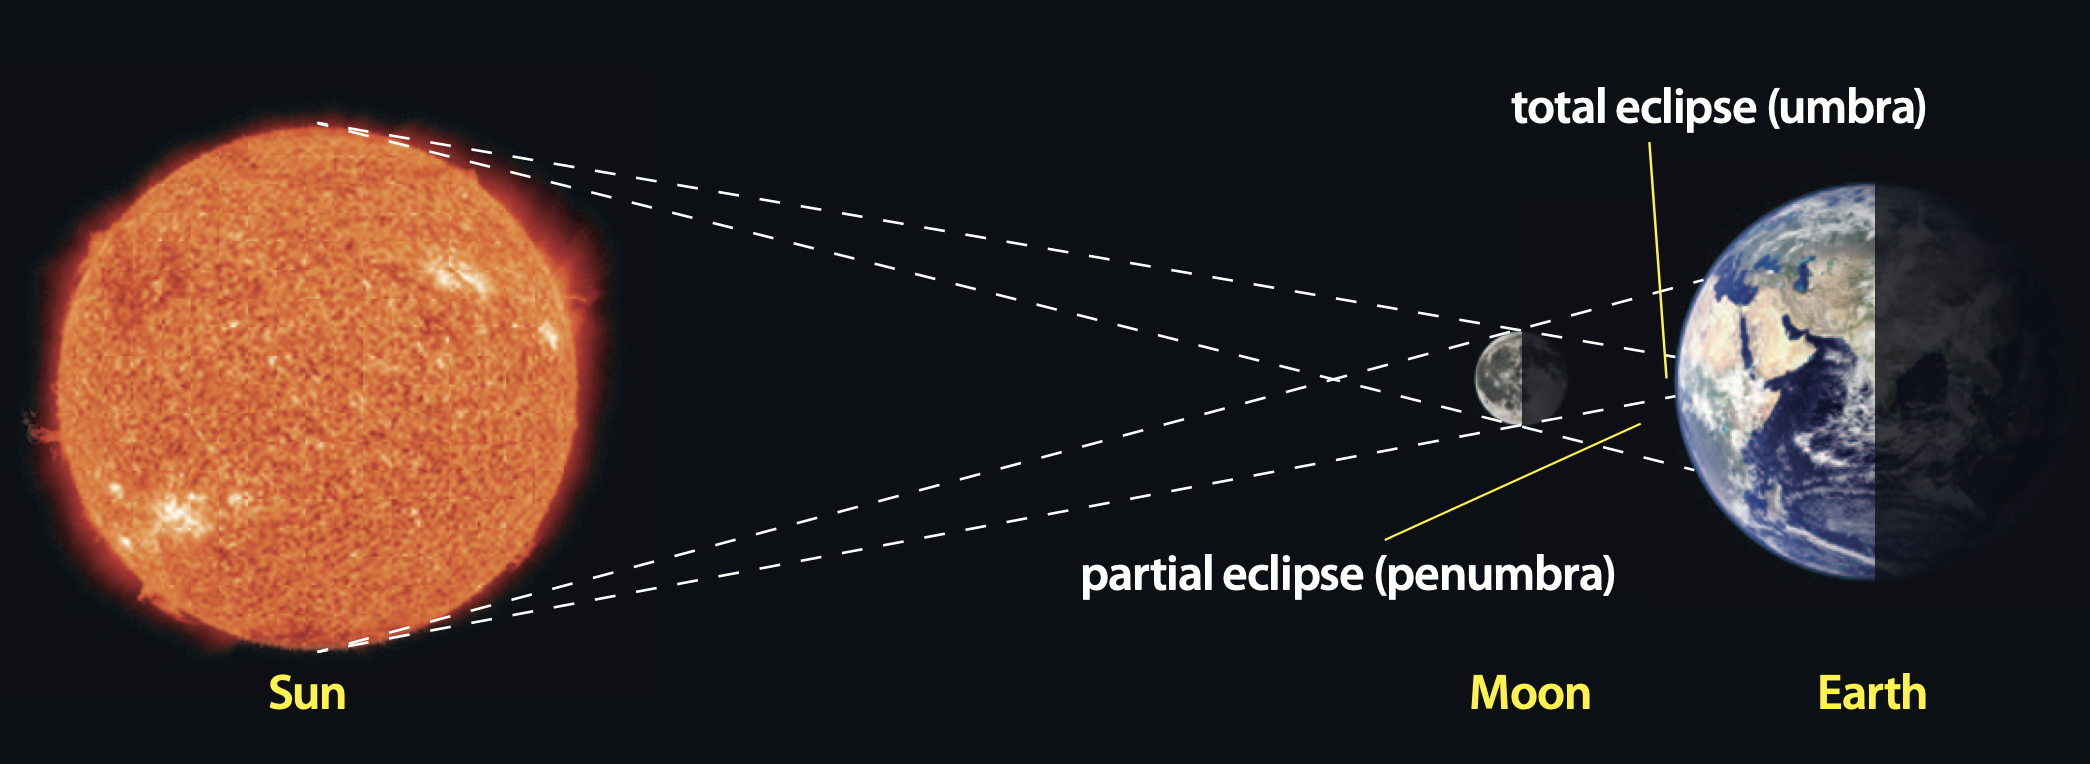 The UK’s view of the eclipse The Royal Astronomical Society